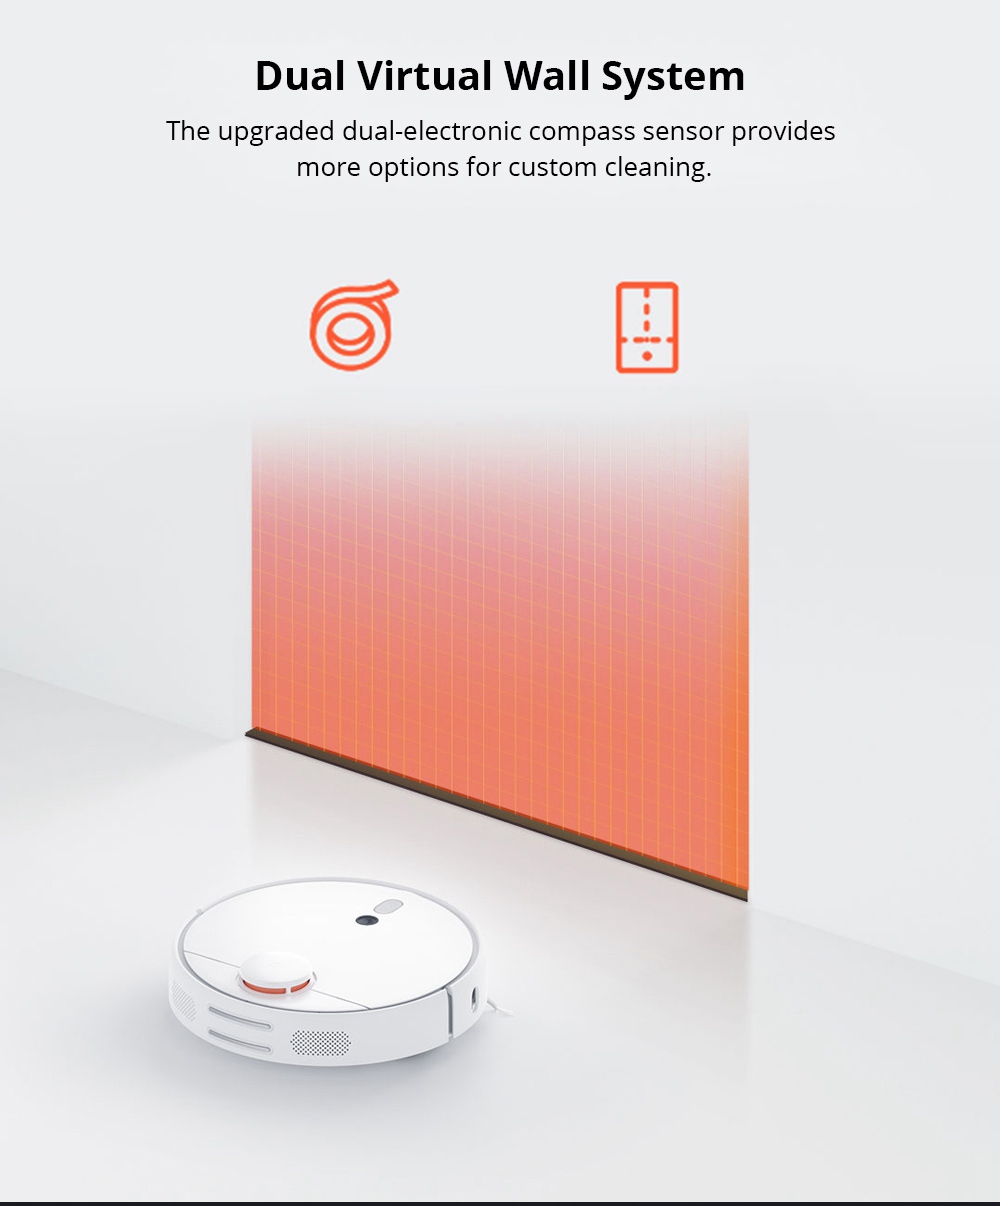 Xiaomi Mijia 1S Robot Vacuum Cleaner LDS + Visual Navigation 2000Pa Suction AI Image Recognition APP Zoned Cleaning Virtual Wall 5200mAh - White